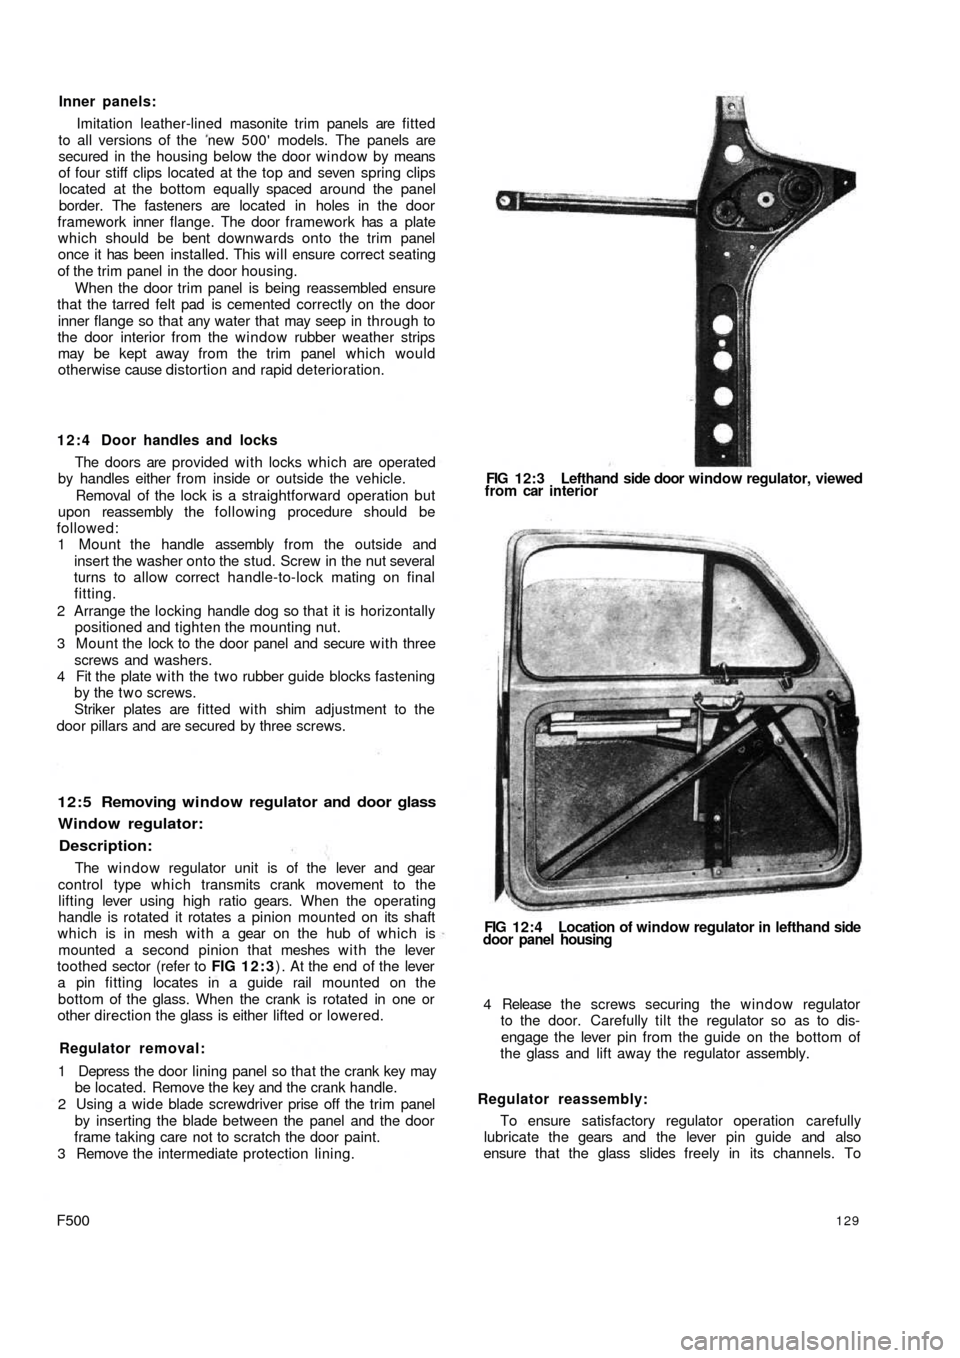 FIAT 500 1967 1.G Workshop Manual Inner panels:
Imitation leather-lined masonite trim panels are fitted
to all versions of the  new 500 models. The panels are
secured in the housing below the door window by means
of four stiff clips 